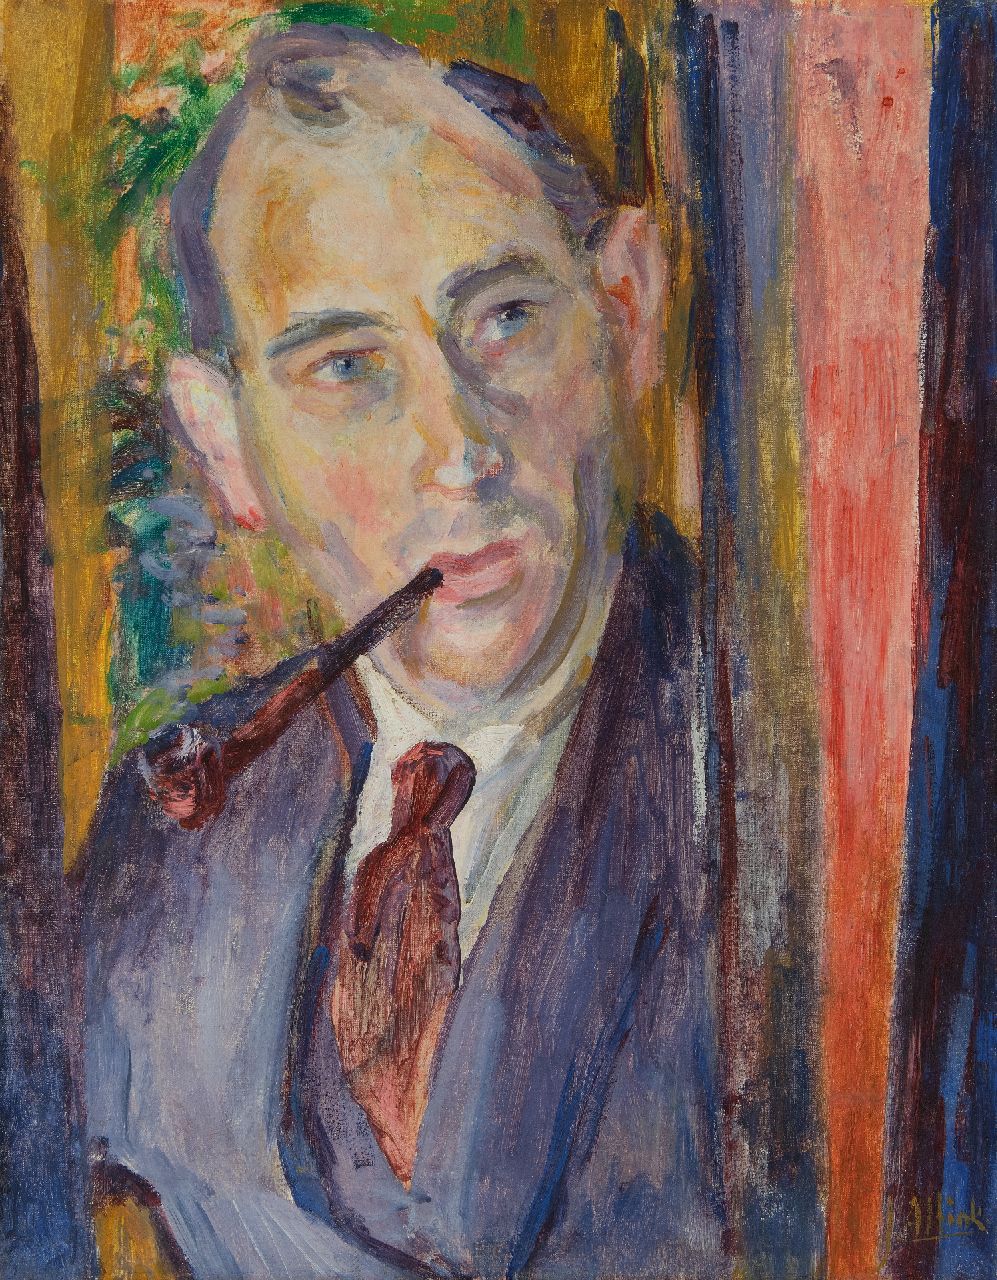 Altink J.  | Jan Altink, Self portrait, oil on canvas 54.4 x 42.1 cm, signed l.r. and painted circa 1925